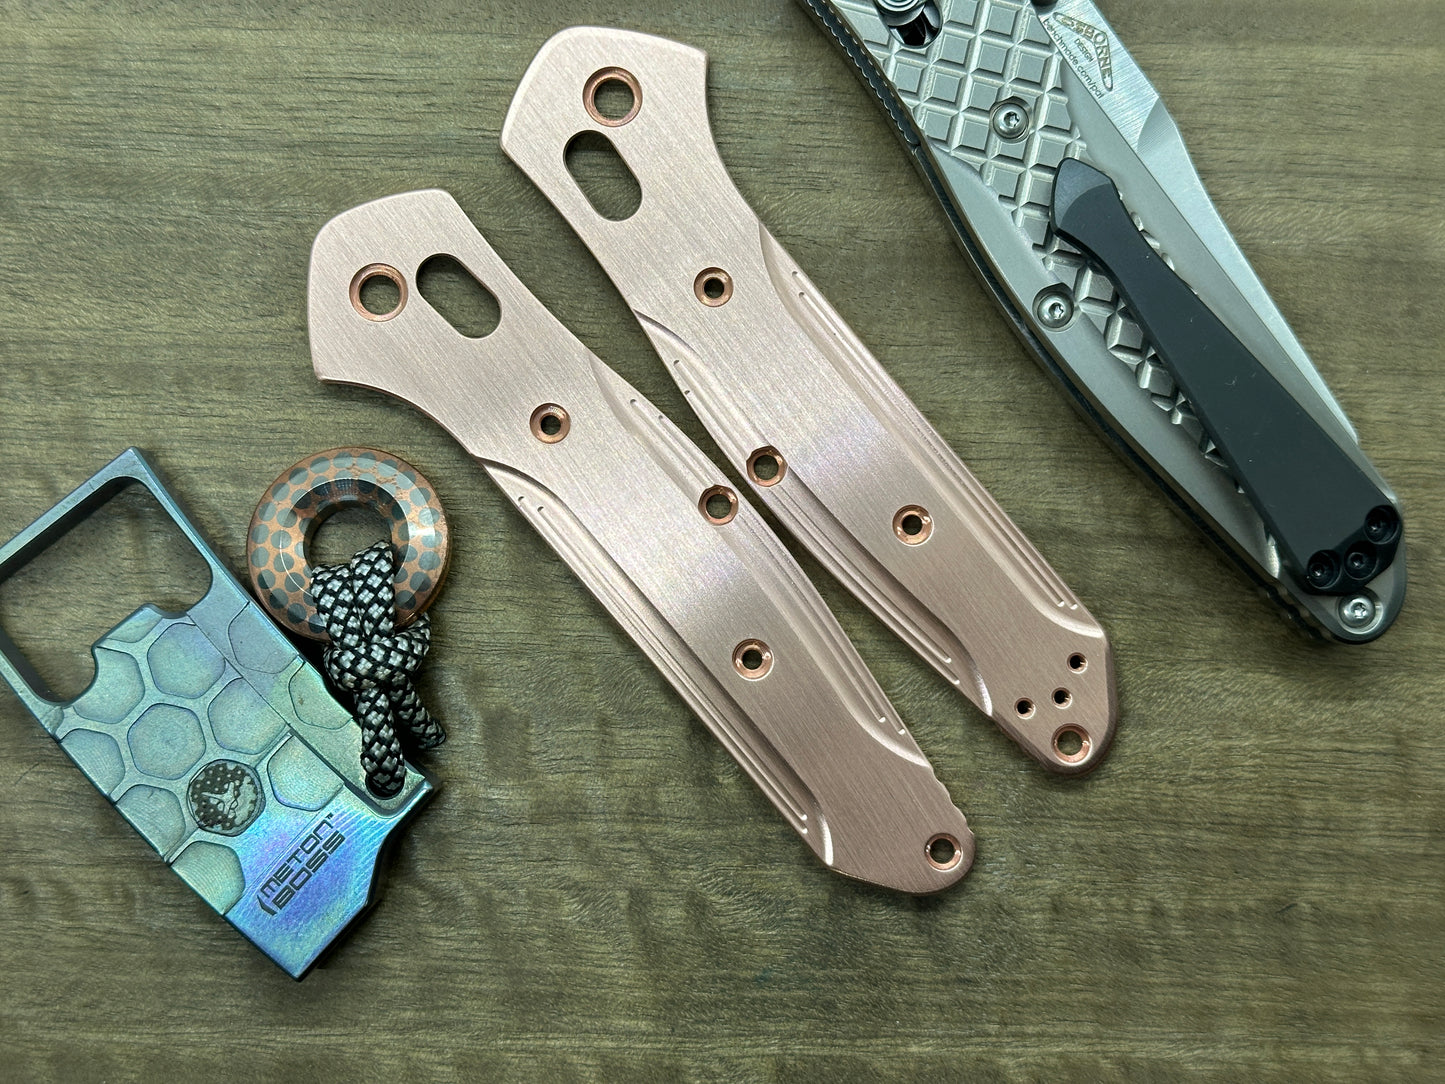 BRUSHED Copper Scales for Benchmade 940 Osborne